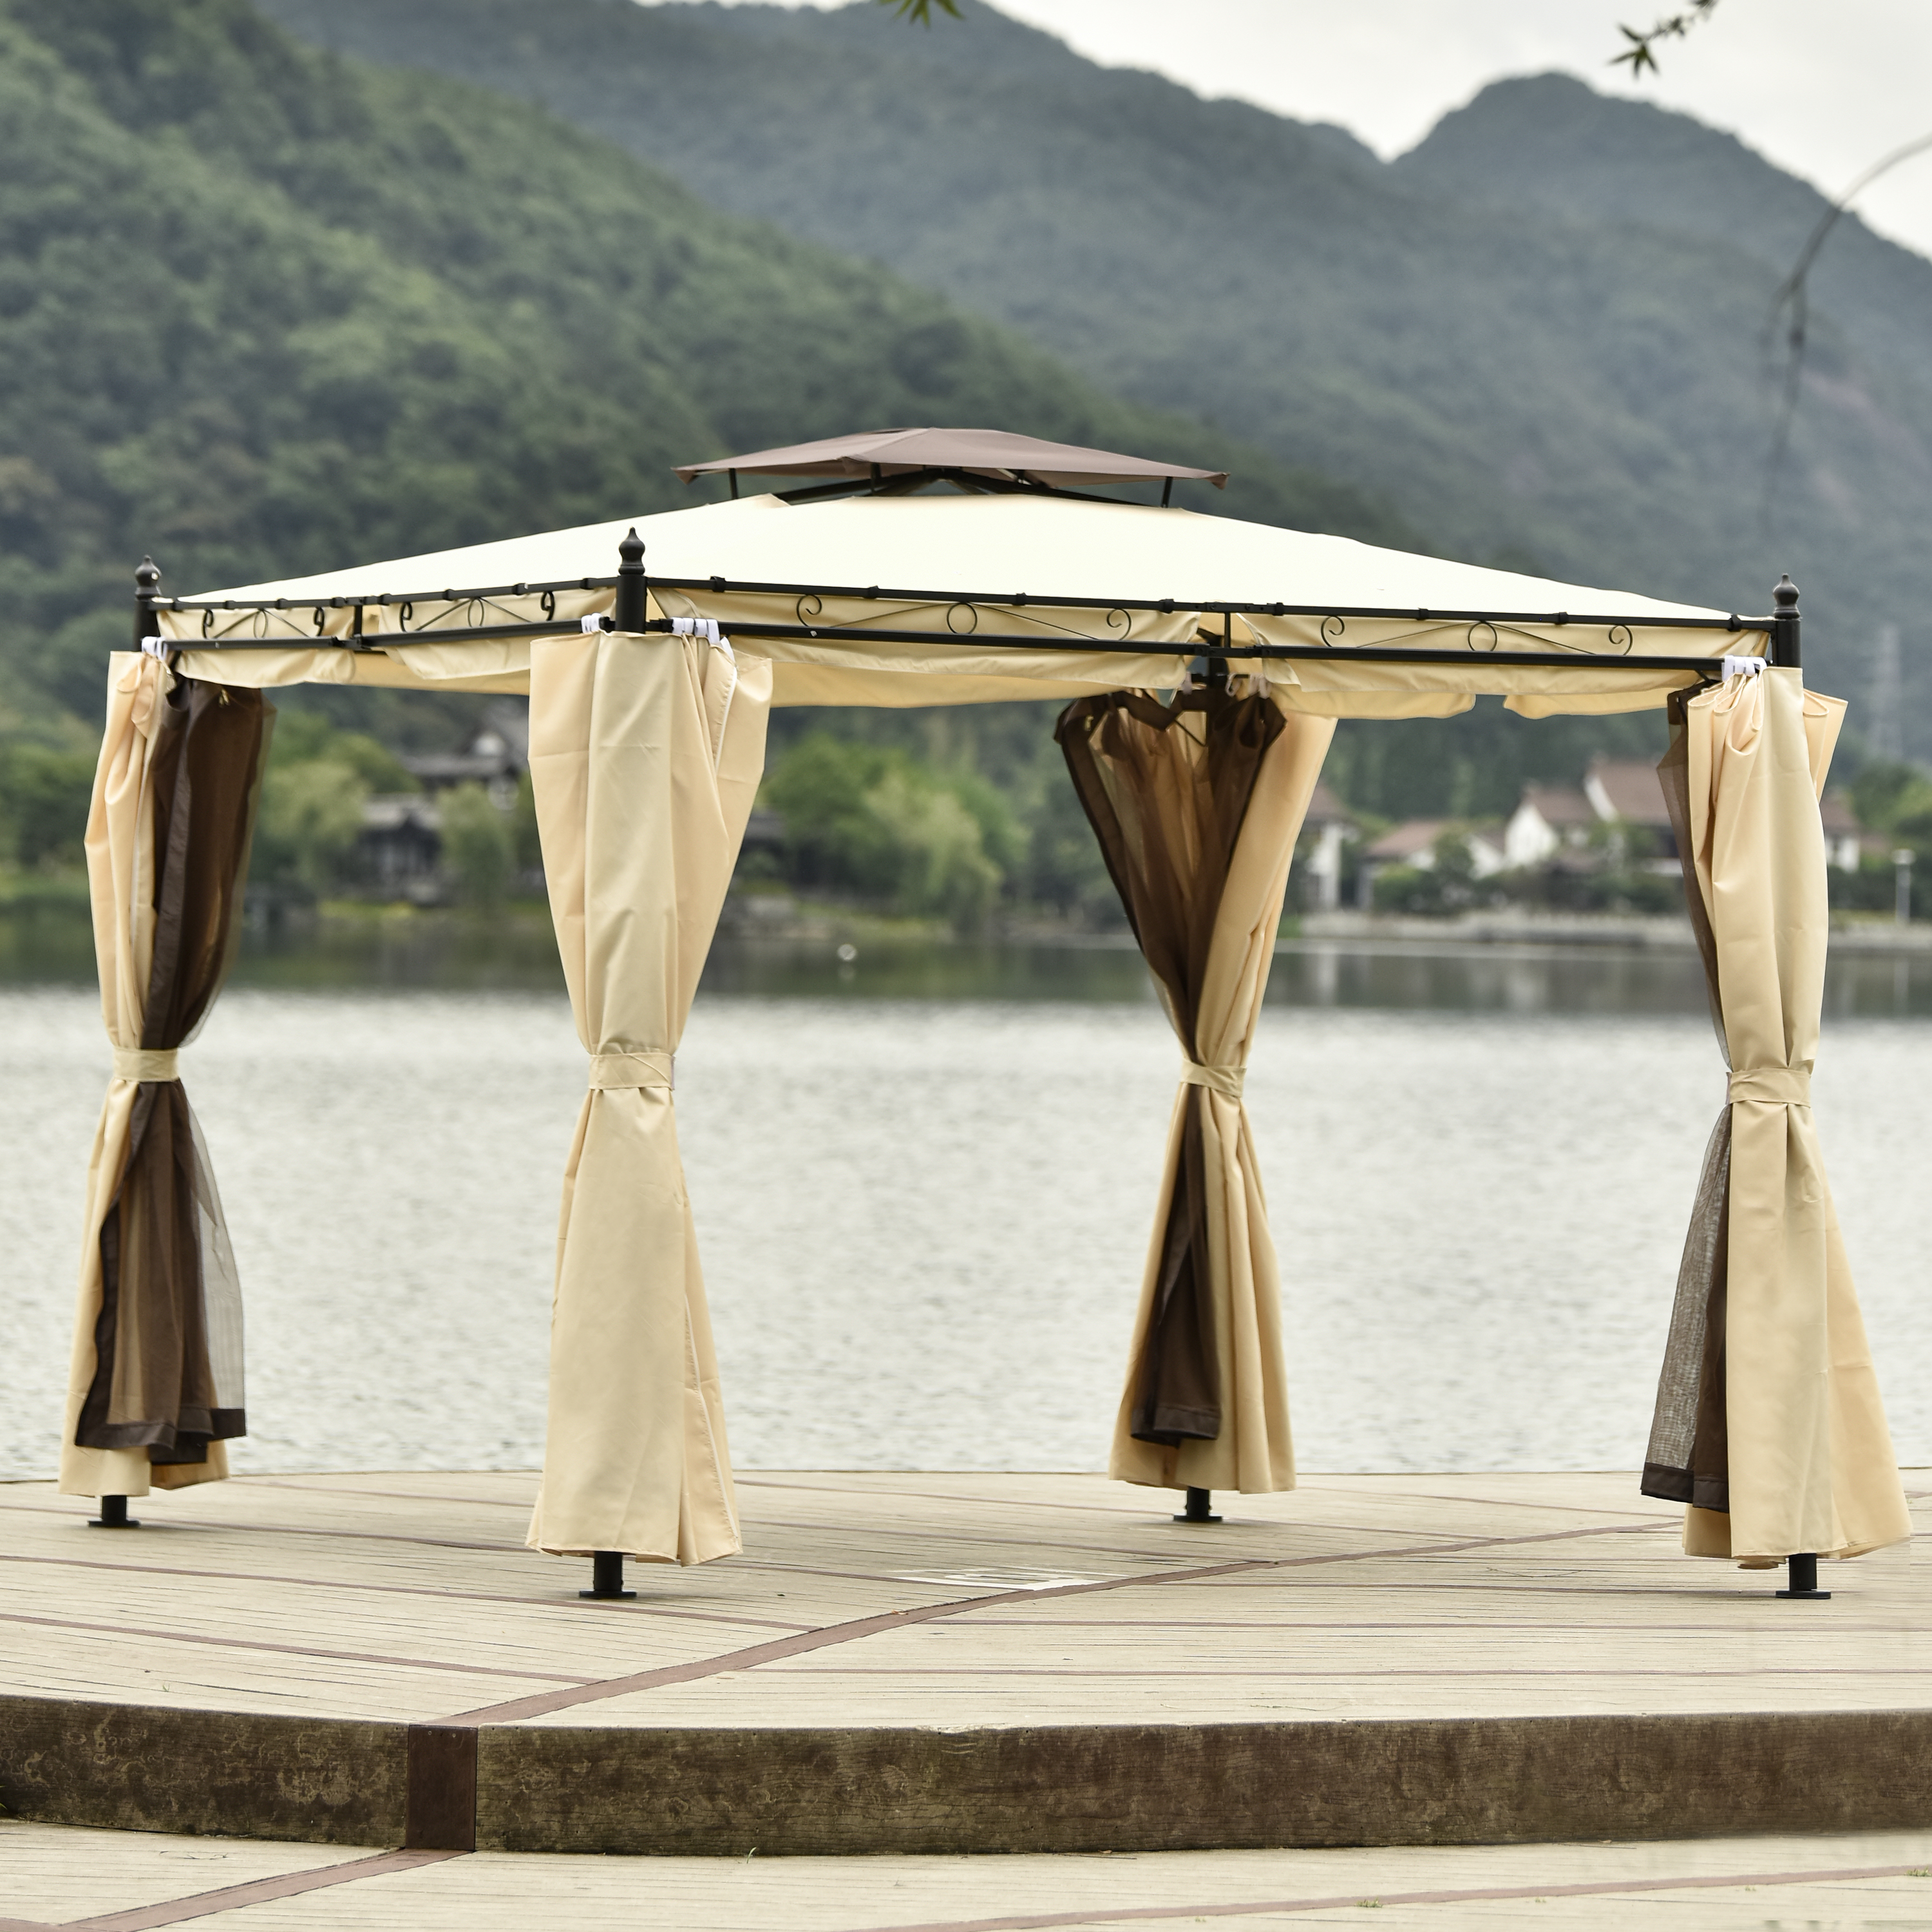  9.3ft.Lx9.3ft. WOutdoor Patio Gazebo with Mosquito nets and Polyester Curtains, Double Roofs for Decks, Poolsides, Gardens, Beige-Boyel Living